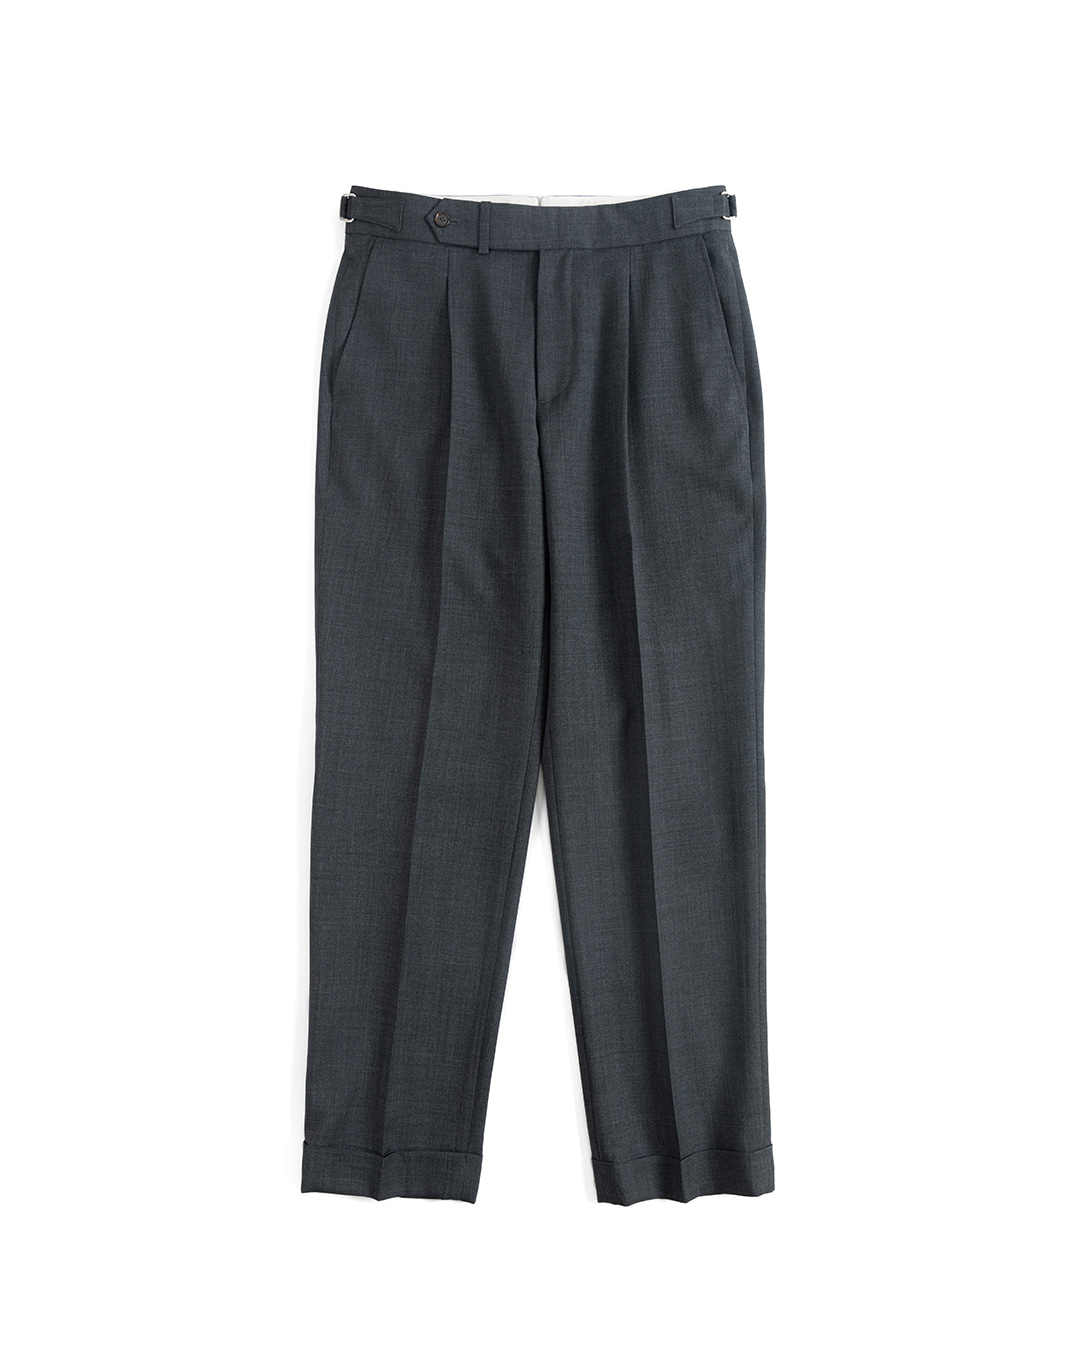 09 SINGLE PLEATED TROUSERS (grey)